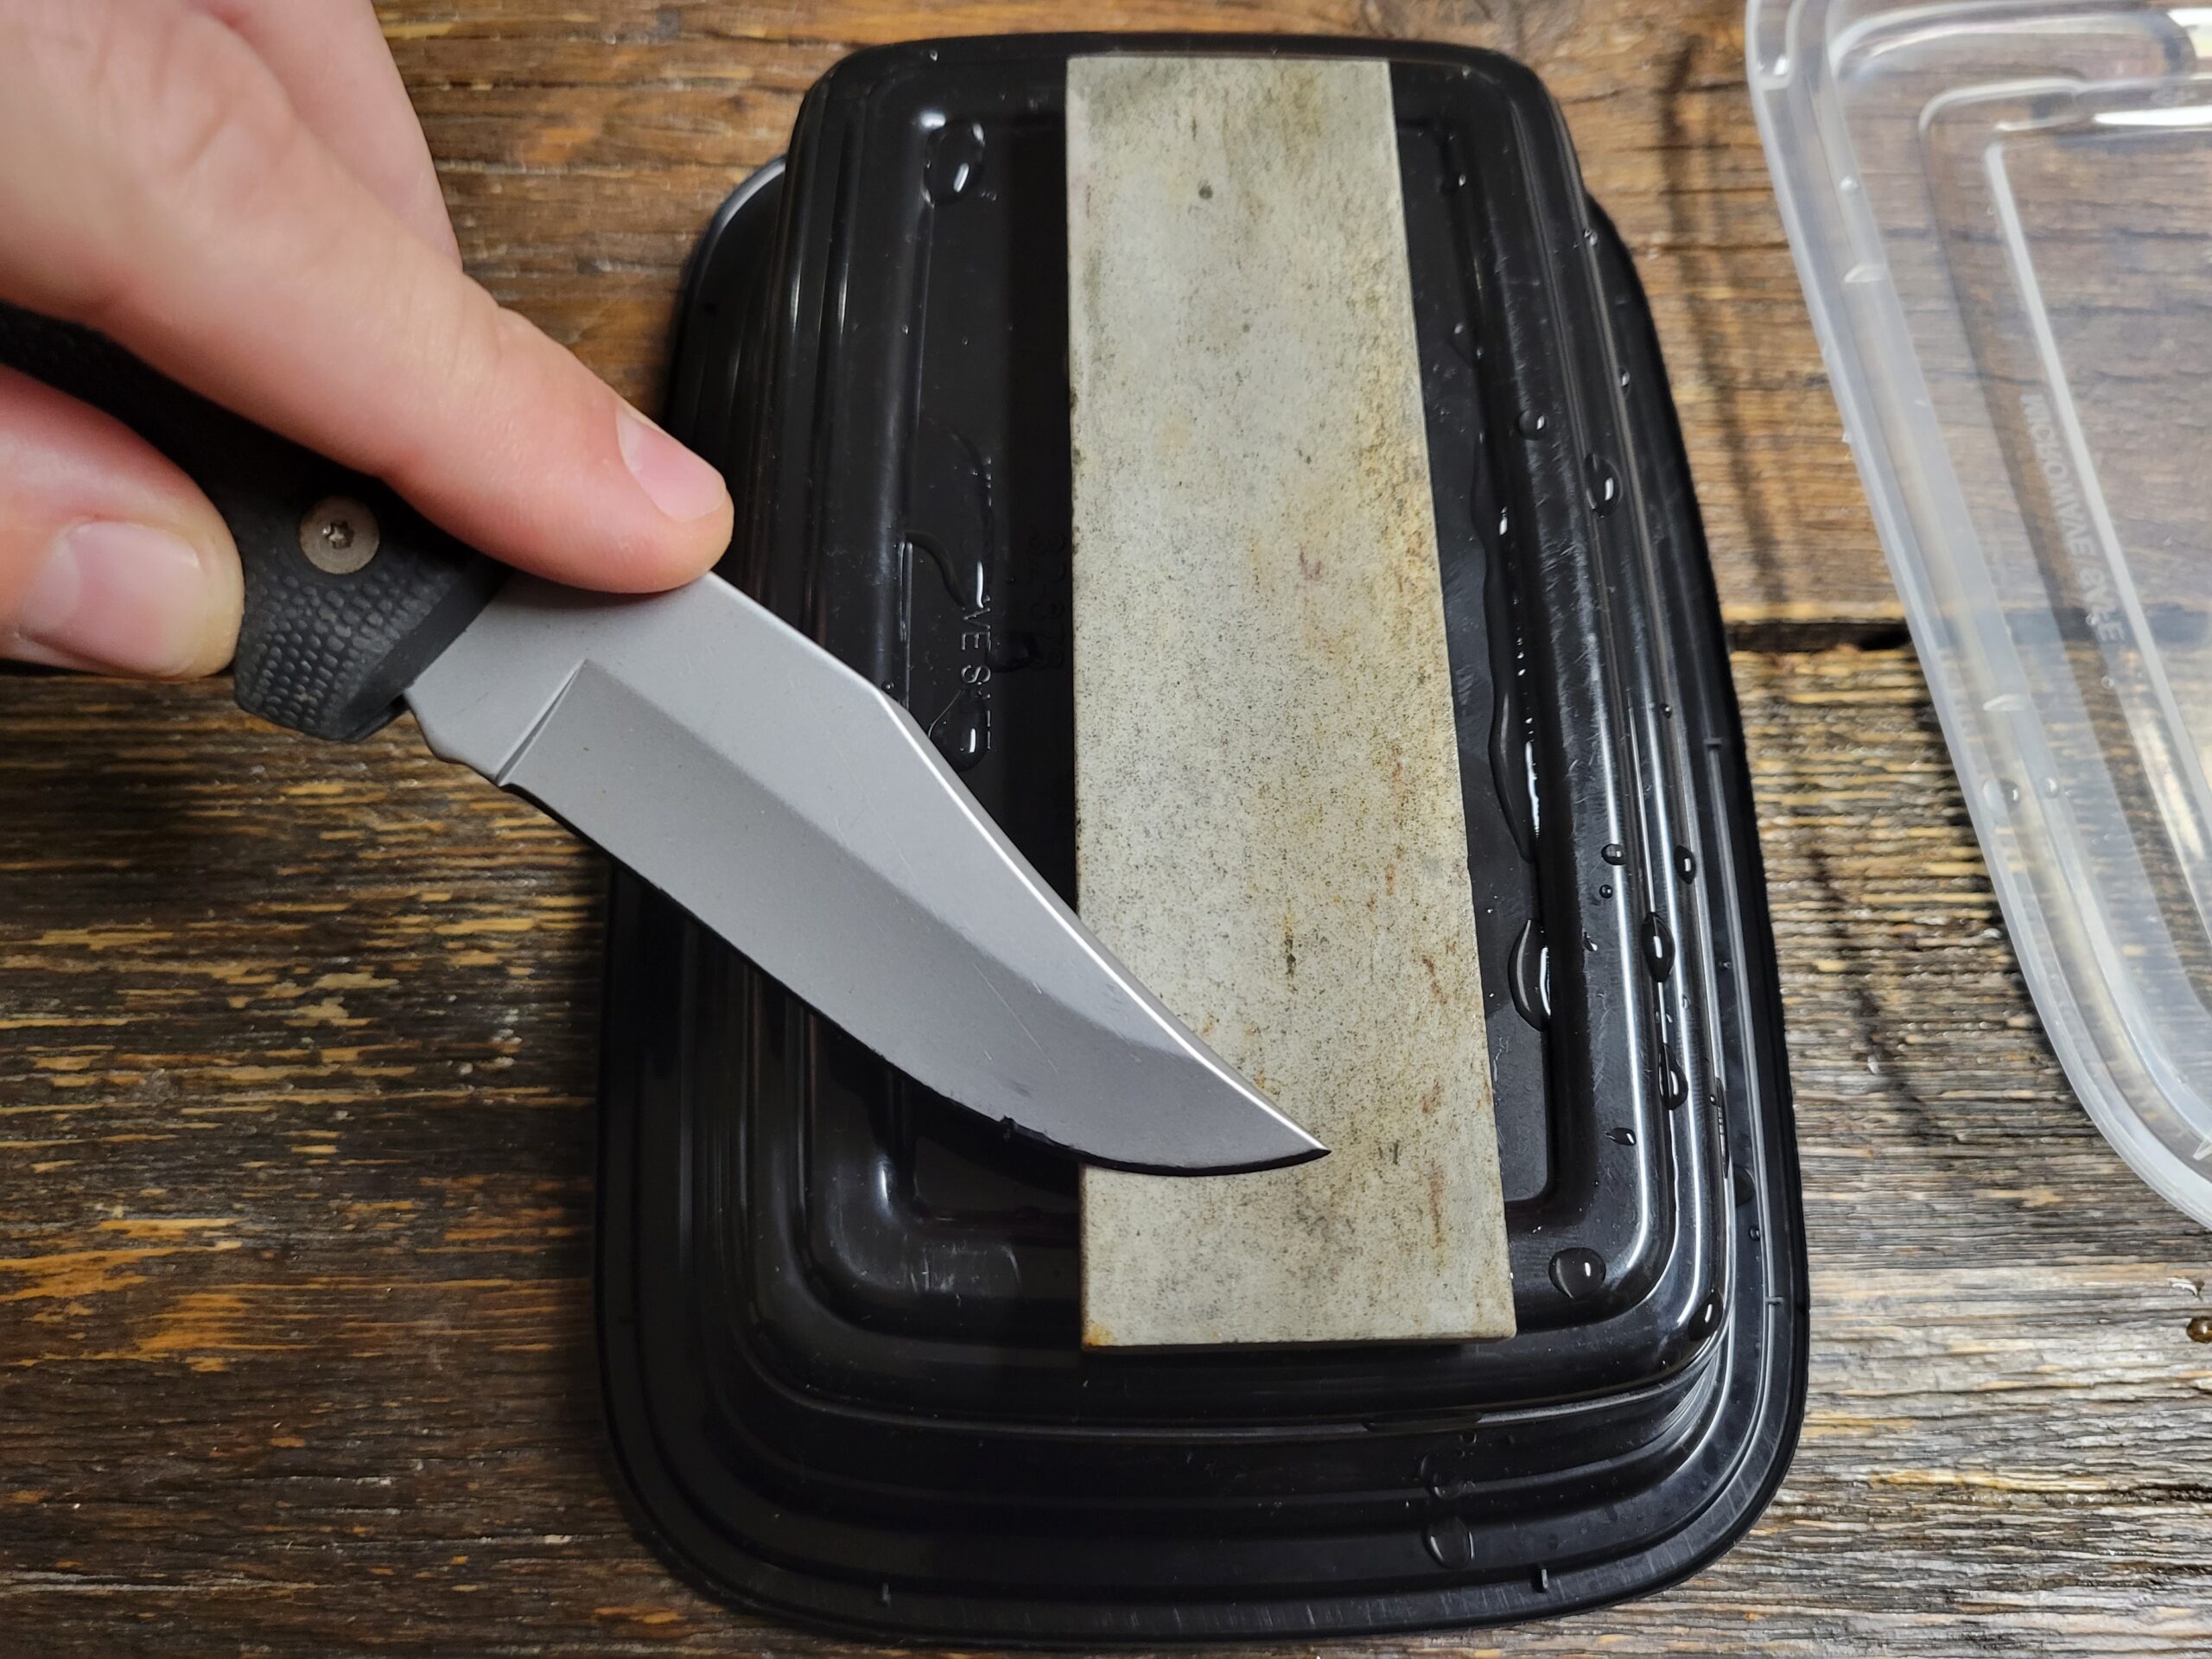 Cold Sharp Steel - A Guide To Putting A Razor Edge On Your Knife